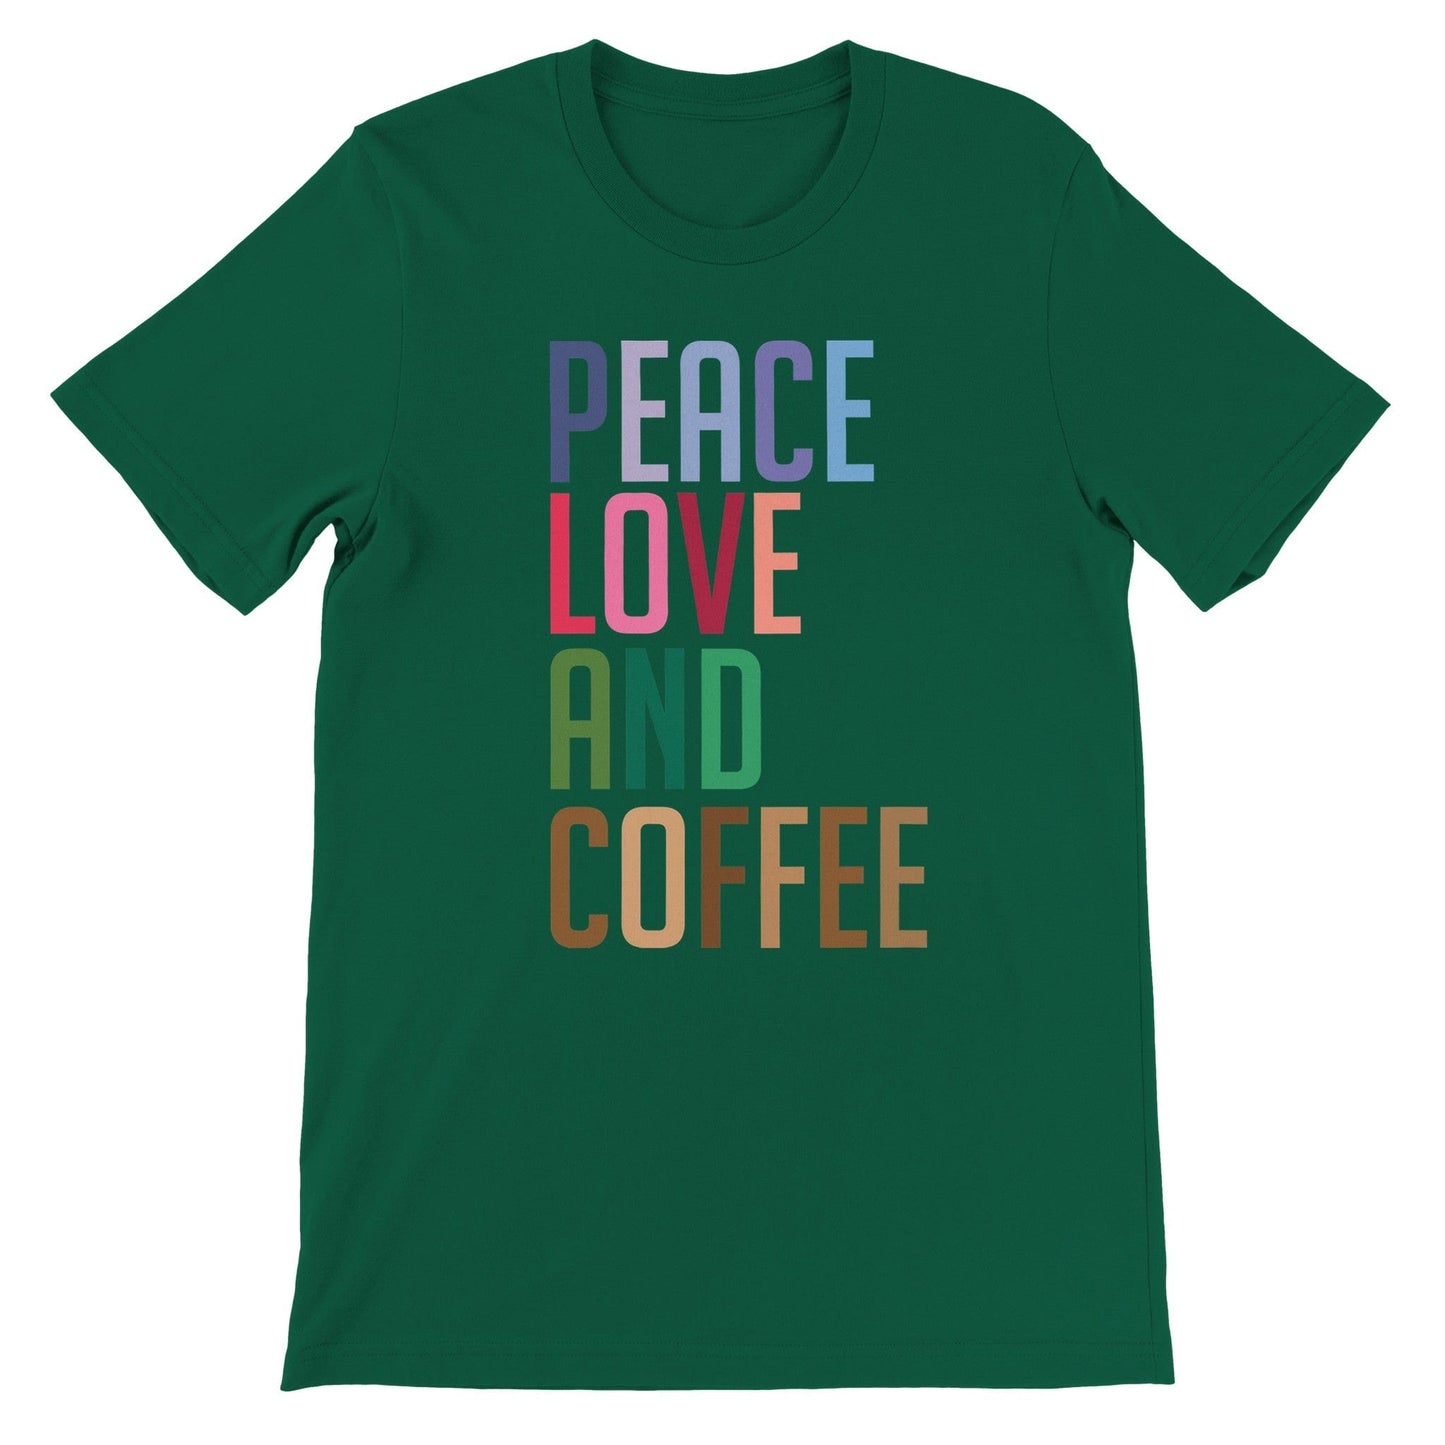 Good Bean Gifts "Peace Love and Coffee" - Unisex Crewneck T-shirt Evergreen / S